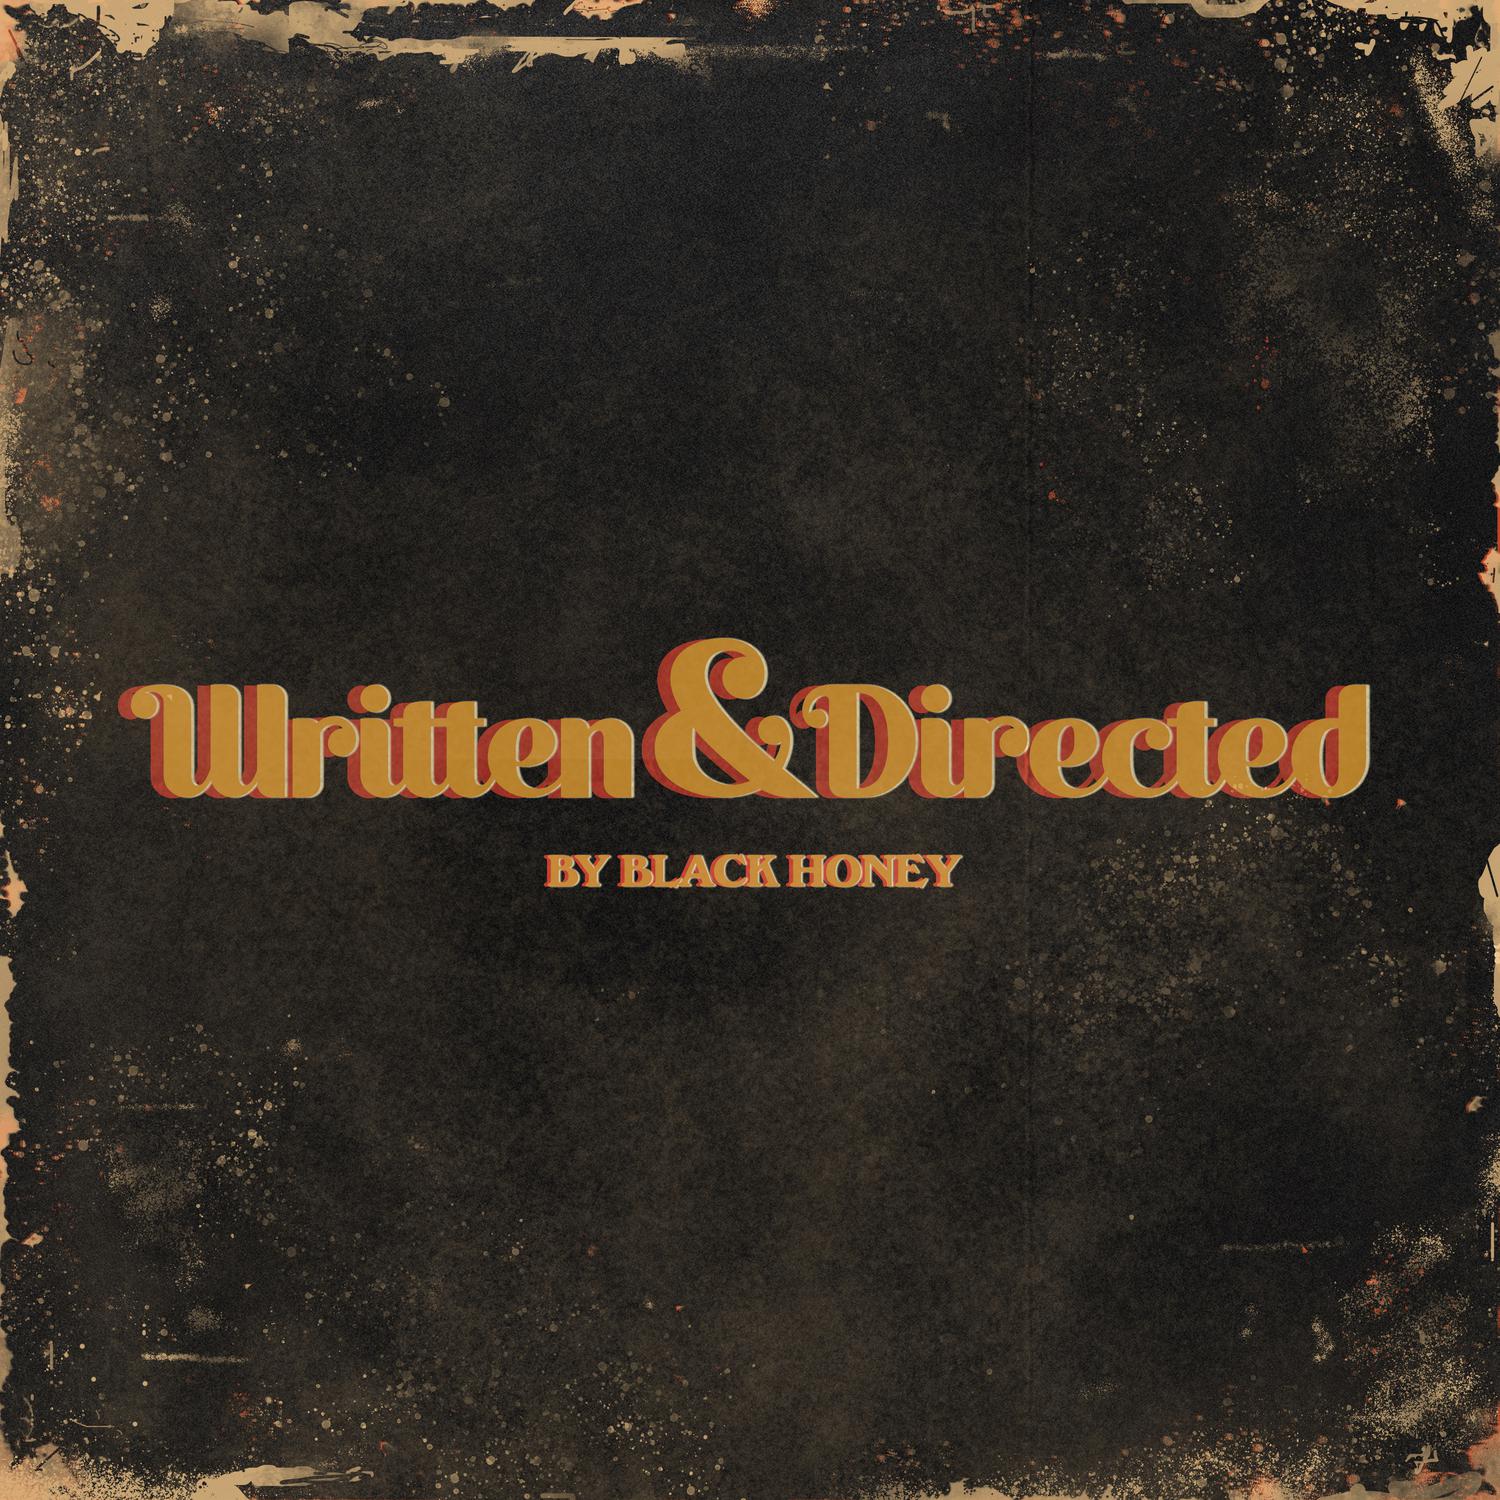 I Like the Way You Die歌词 歌手Black Honey-专辑Written & Directed-单曲《I Like the Way You Die》LRC歌词下载